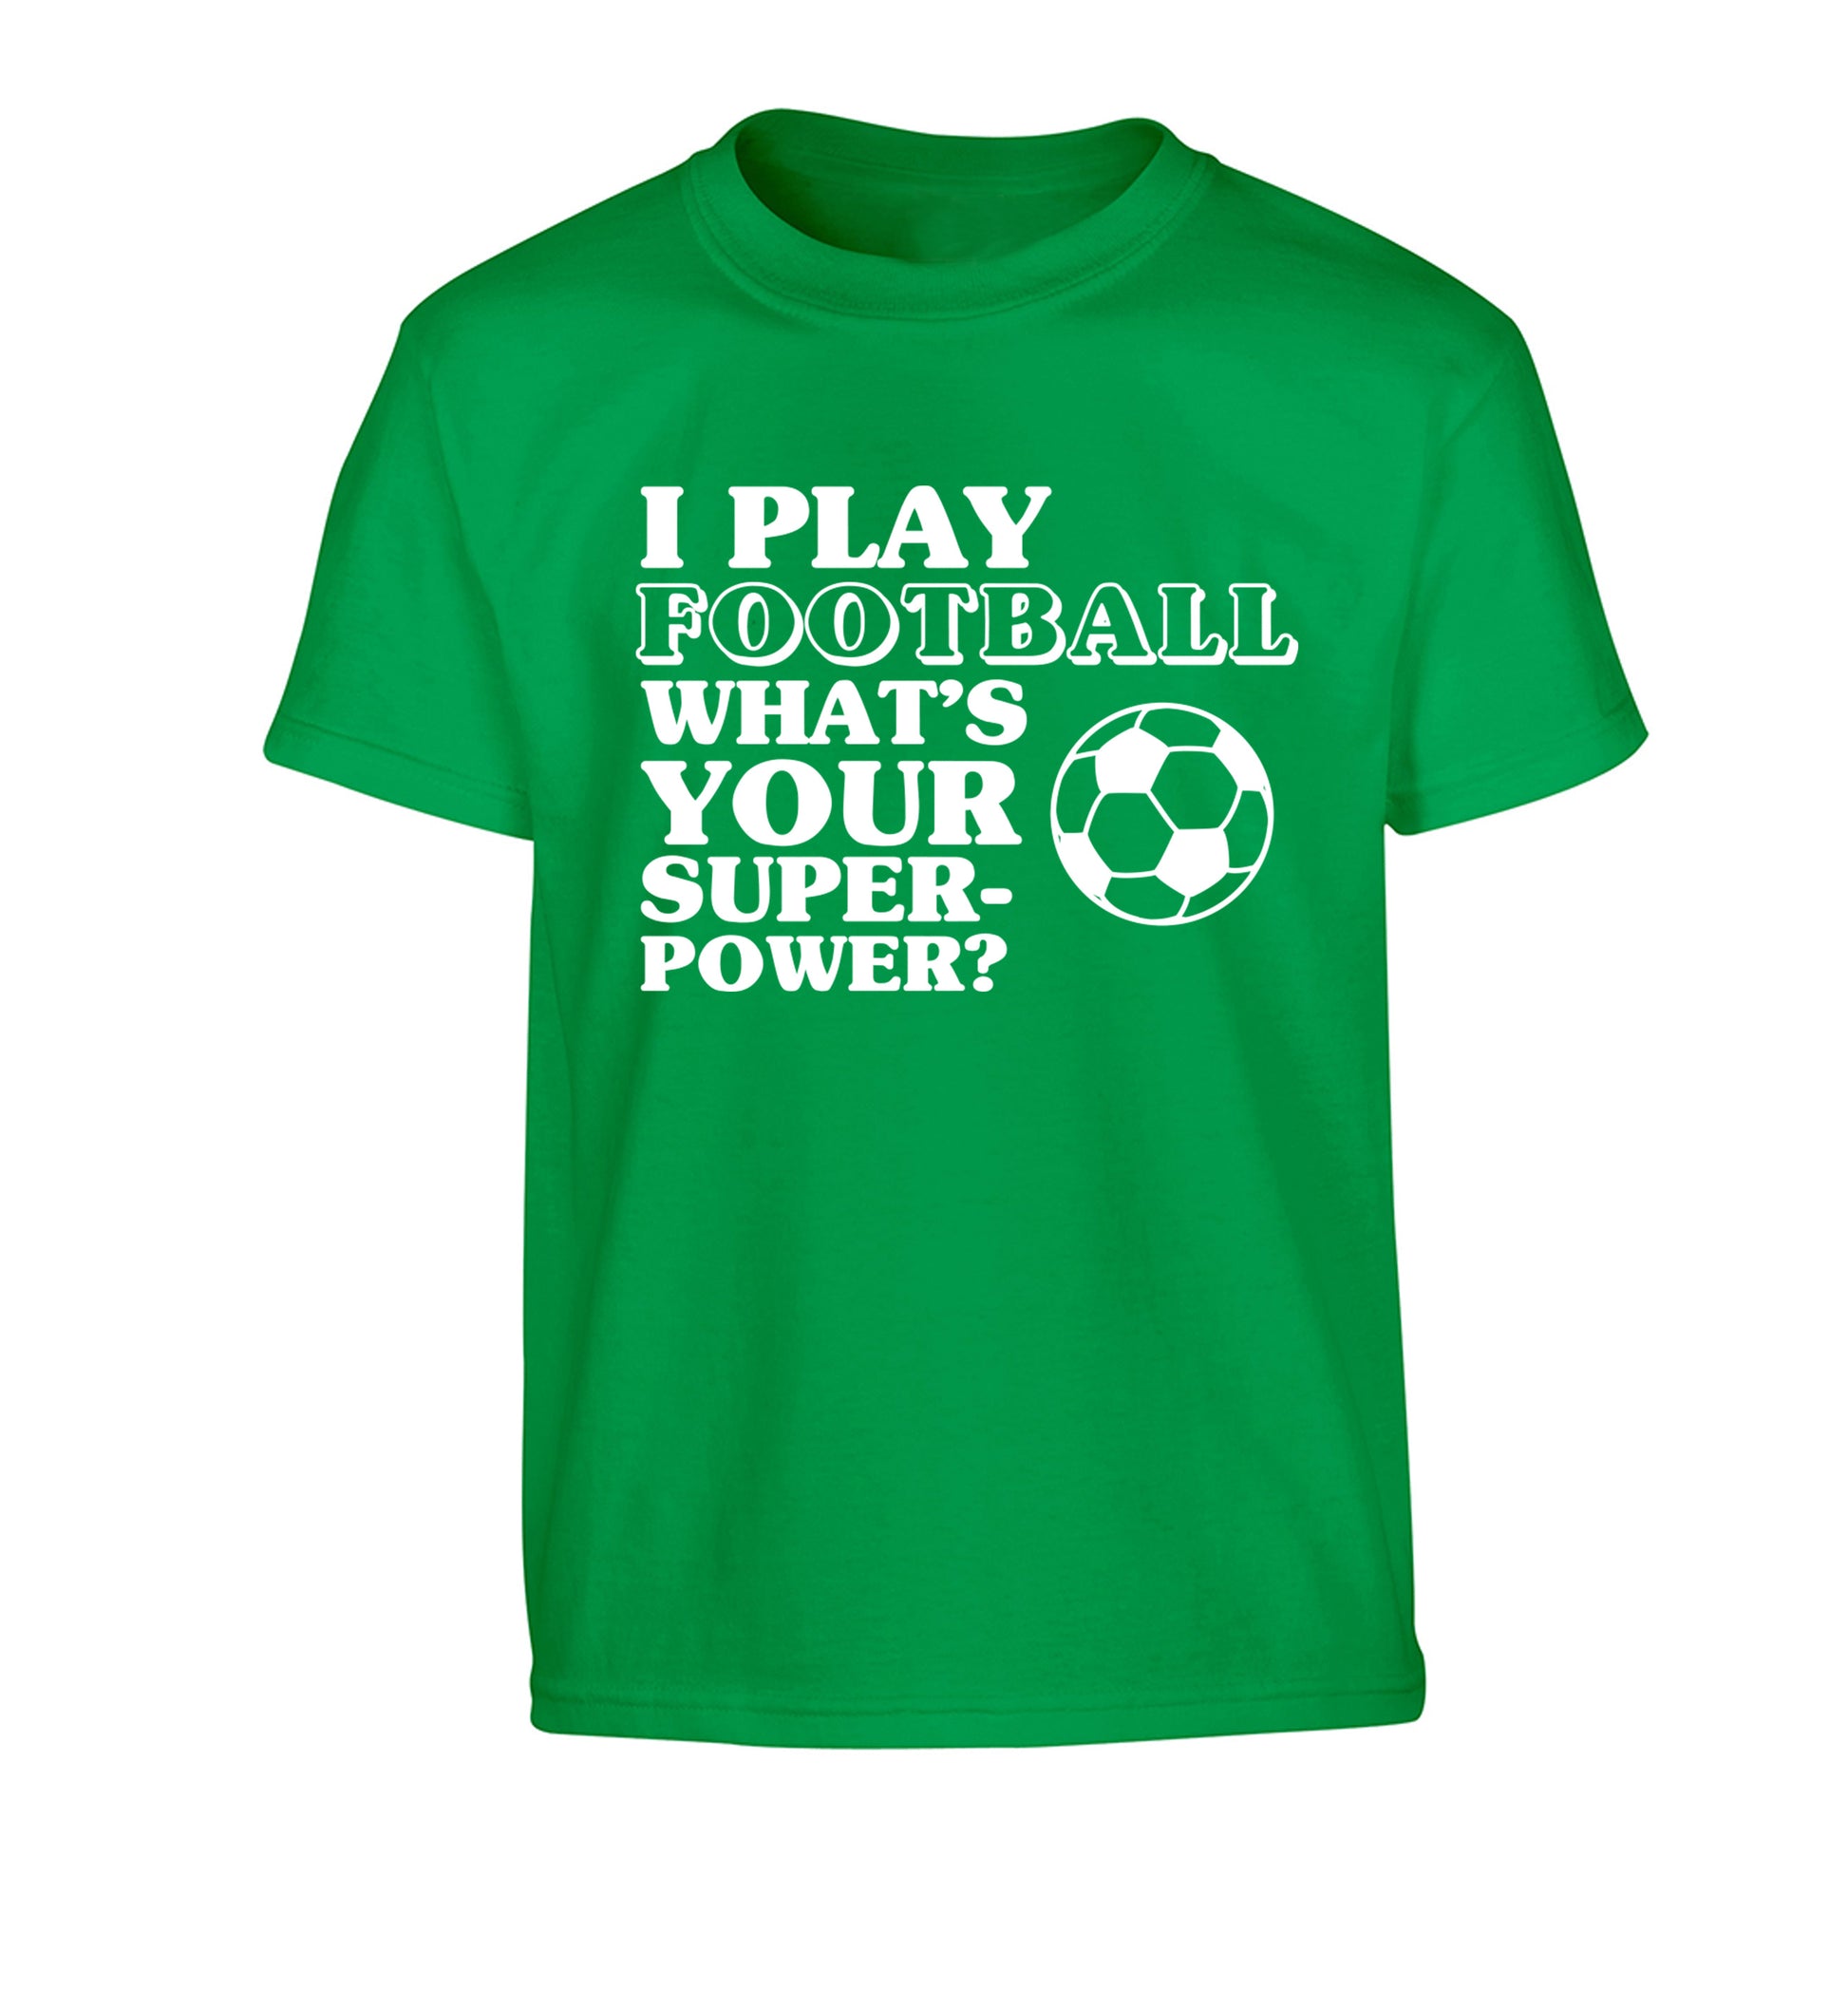 I play football what's your superpower? Children's green Tshirt 12-14 Years